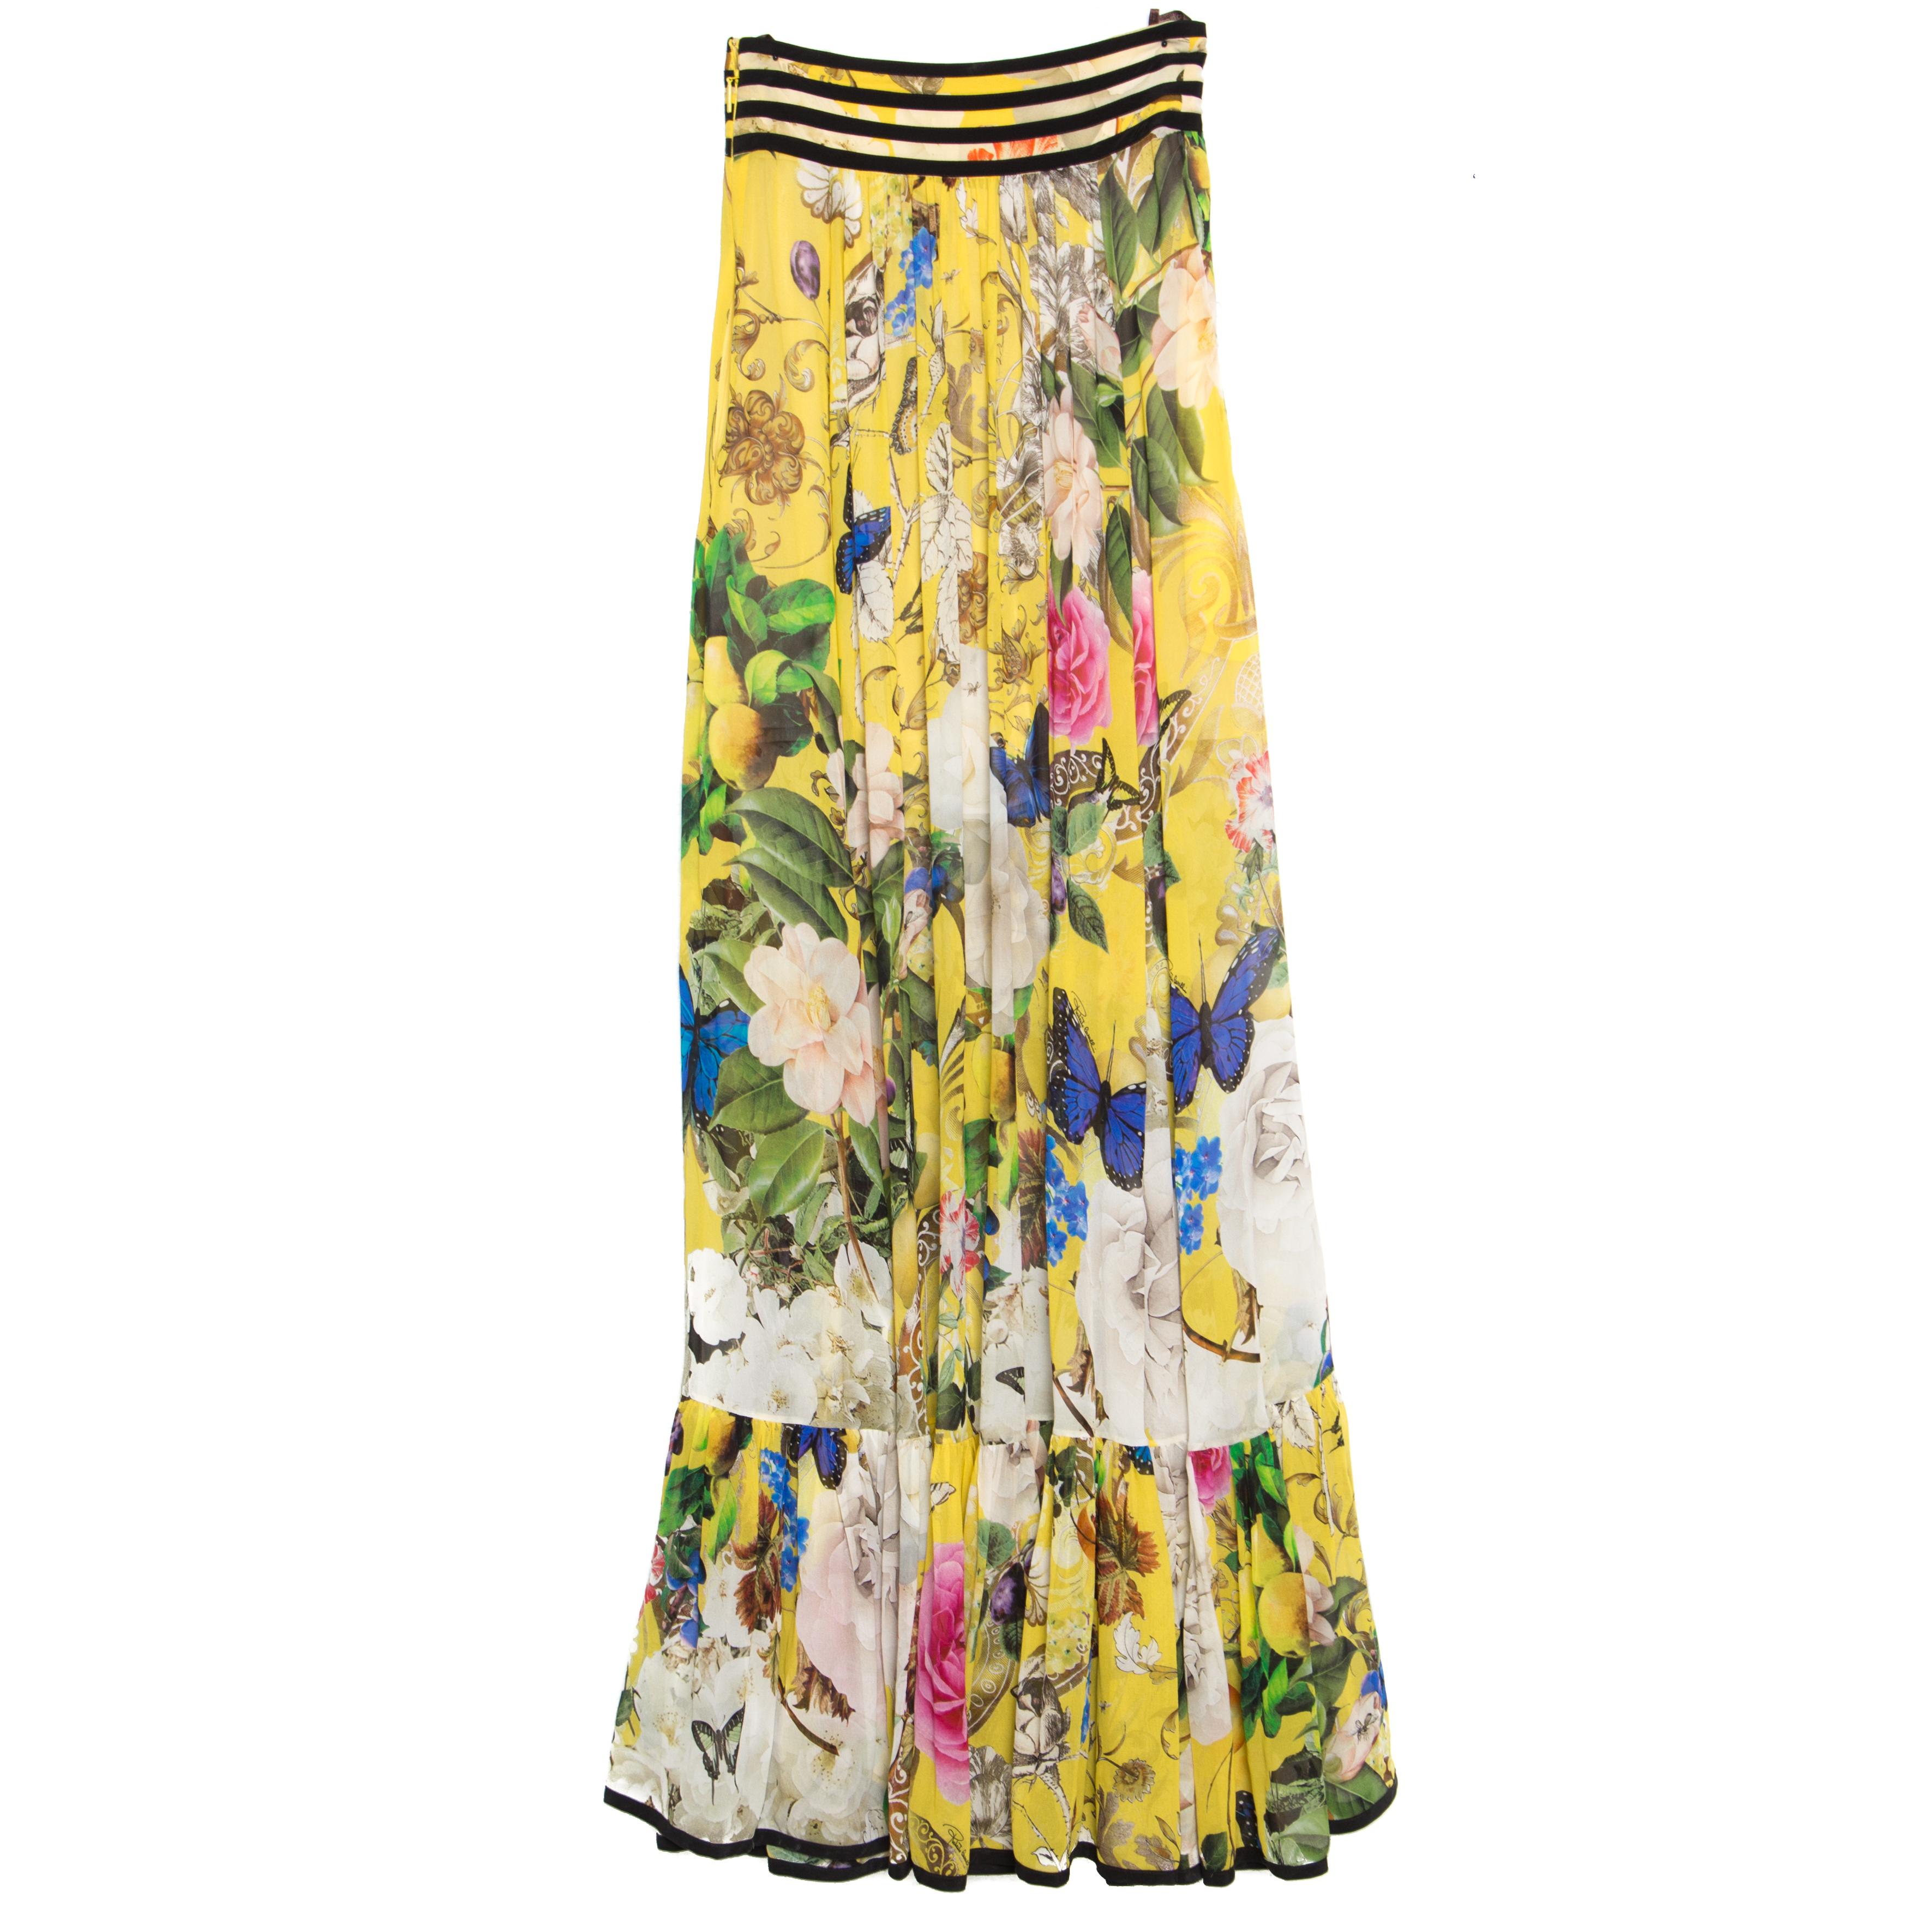 Add a magical touch of style and shine to your appearance with this Roberto Cavalli skirt. Make a mark wherever you go adorning this beautiful skirt crafted with silk and adorned with a pretty wonderland print. This gorgeous yellow skirt has a broad